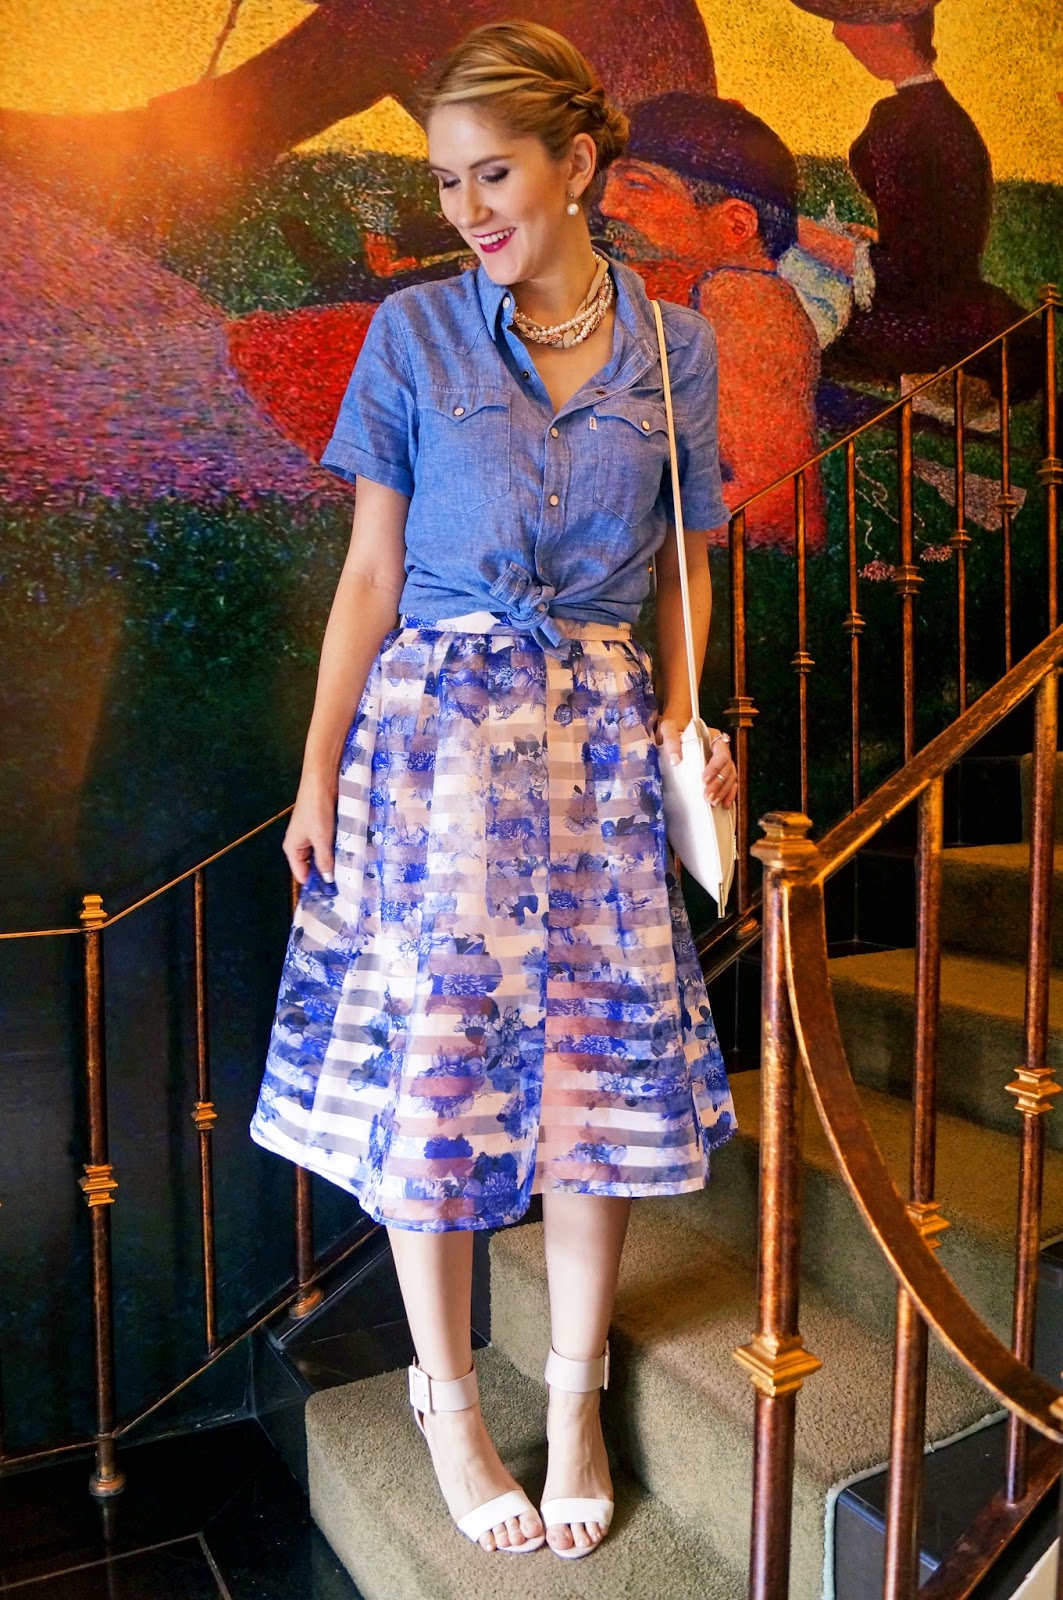 Floral skirt with a casual jean top for Spring!